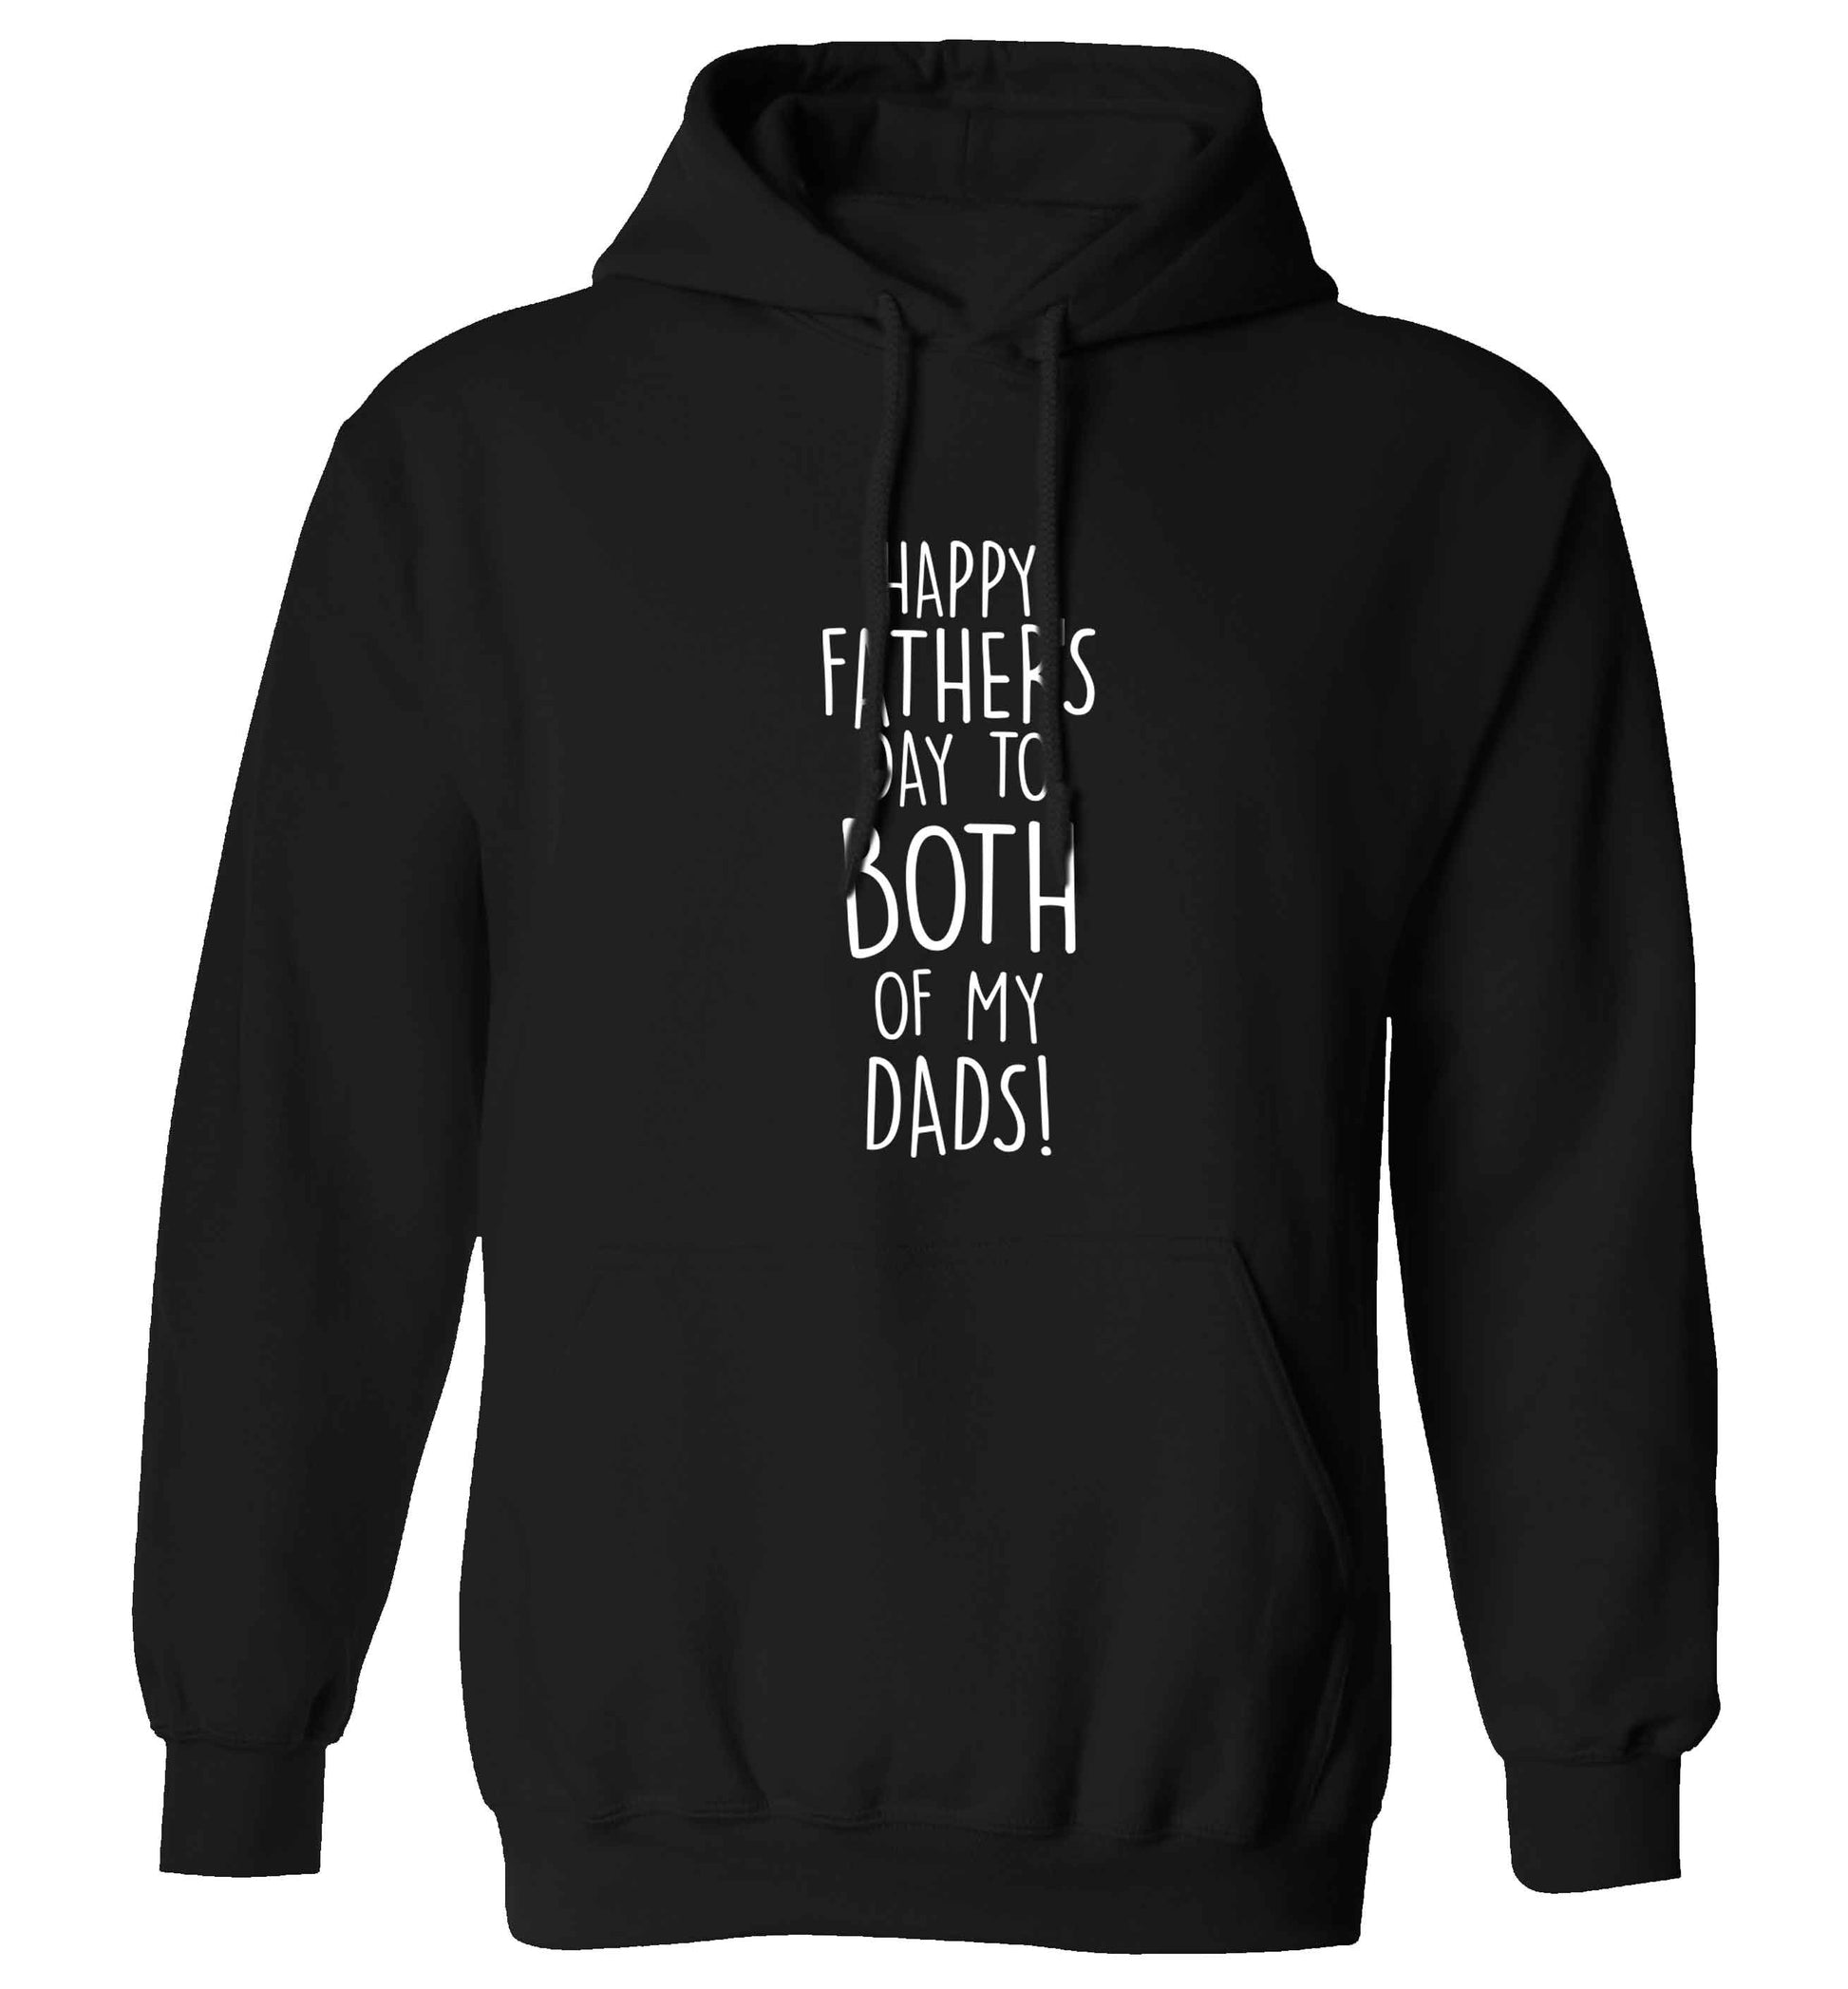 Happy Father's day to both of my dads adults unisex black hoodie 2XL